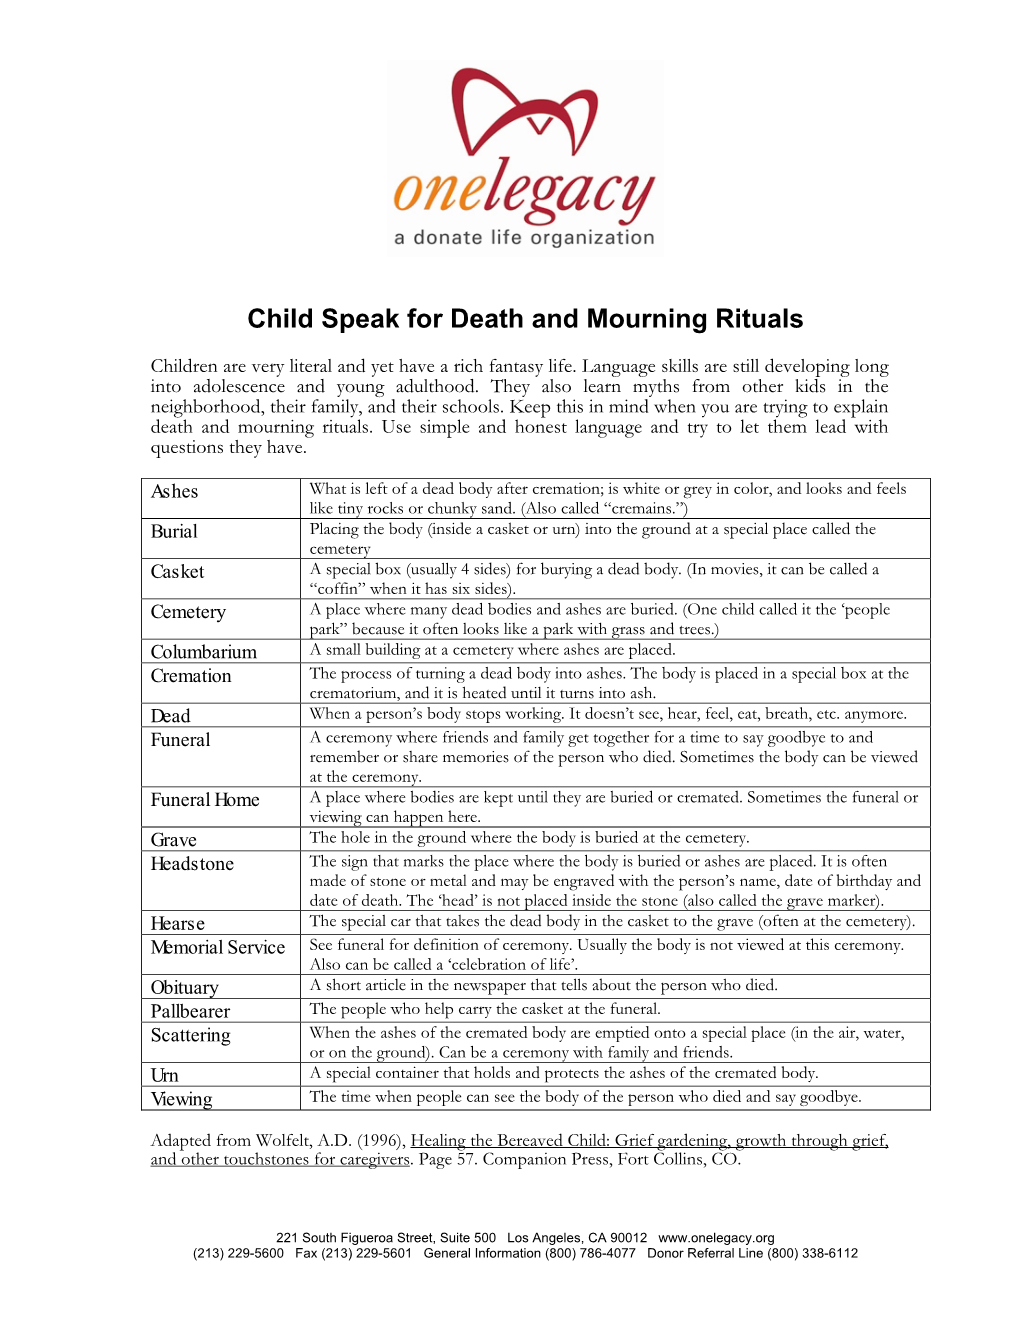 Child Speak for Death and Mourning Rituals